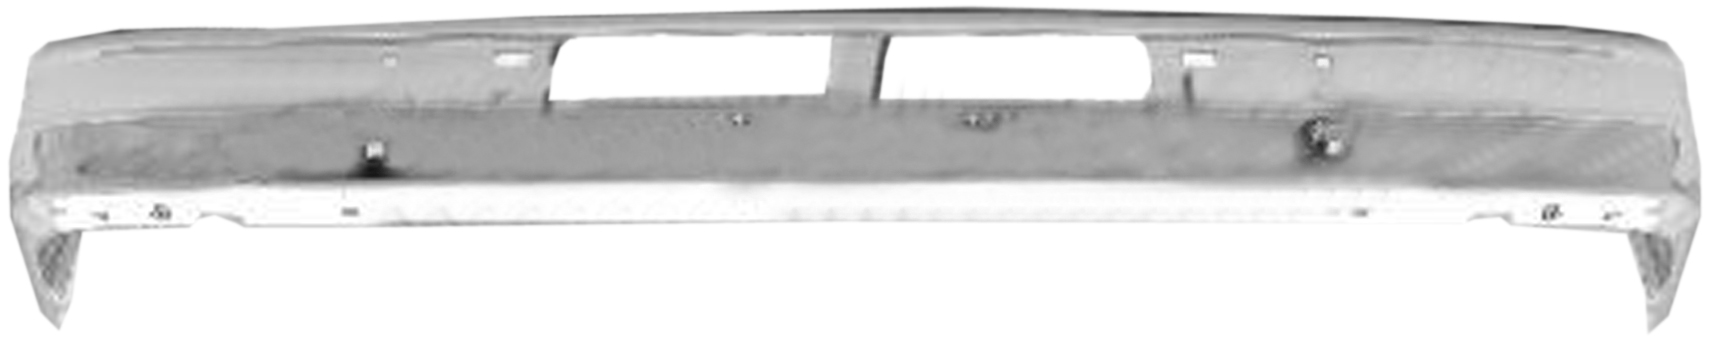 Aftermarket METAL FRONT BUMPERS for FORD - BRONCO II, BRONCO II,89-90,Front bumper face bar